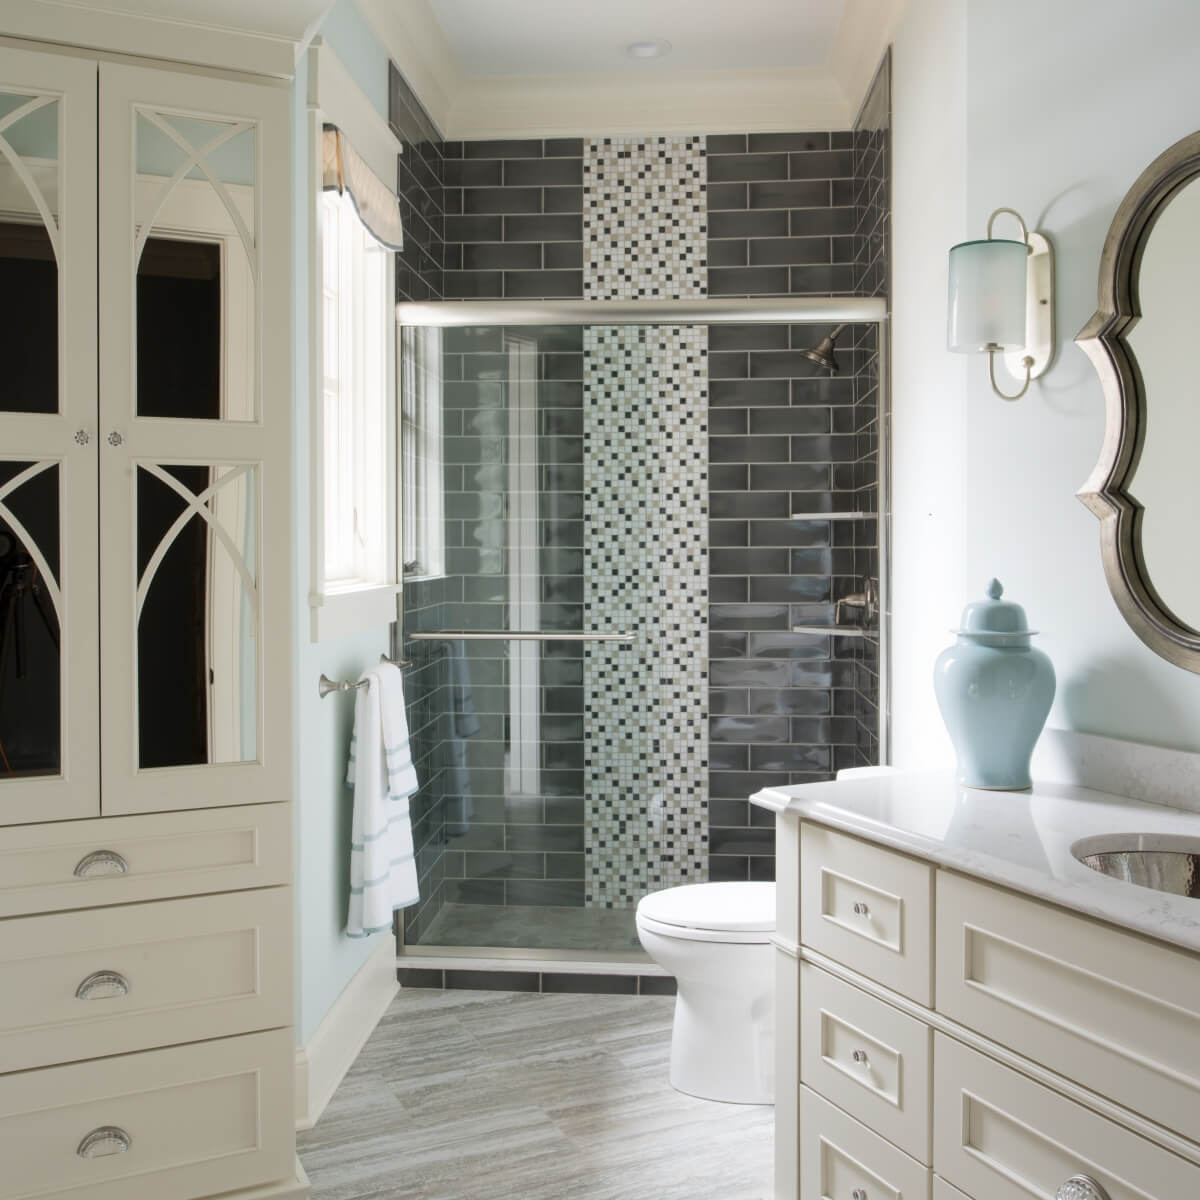 A stunning all white master bathroom with beautiful mullion cabinet doors with mirror glass inserts.